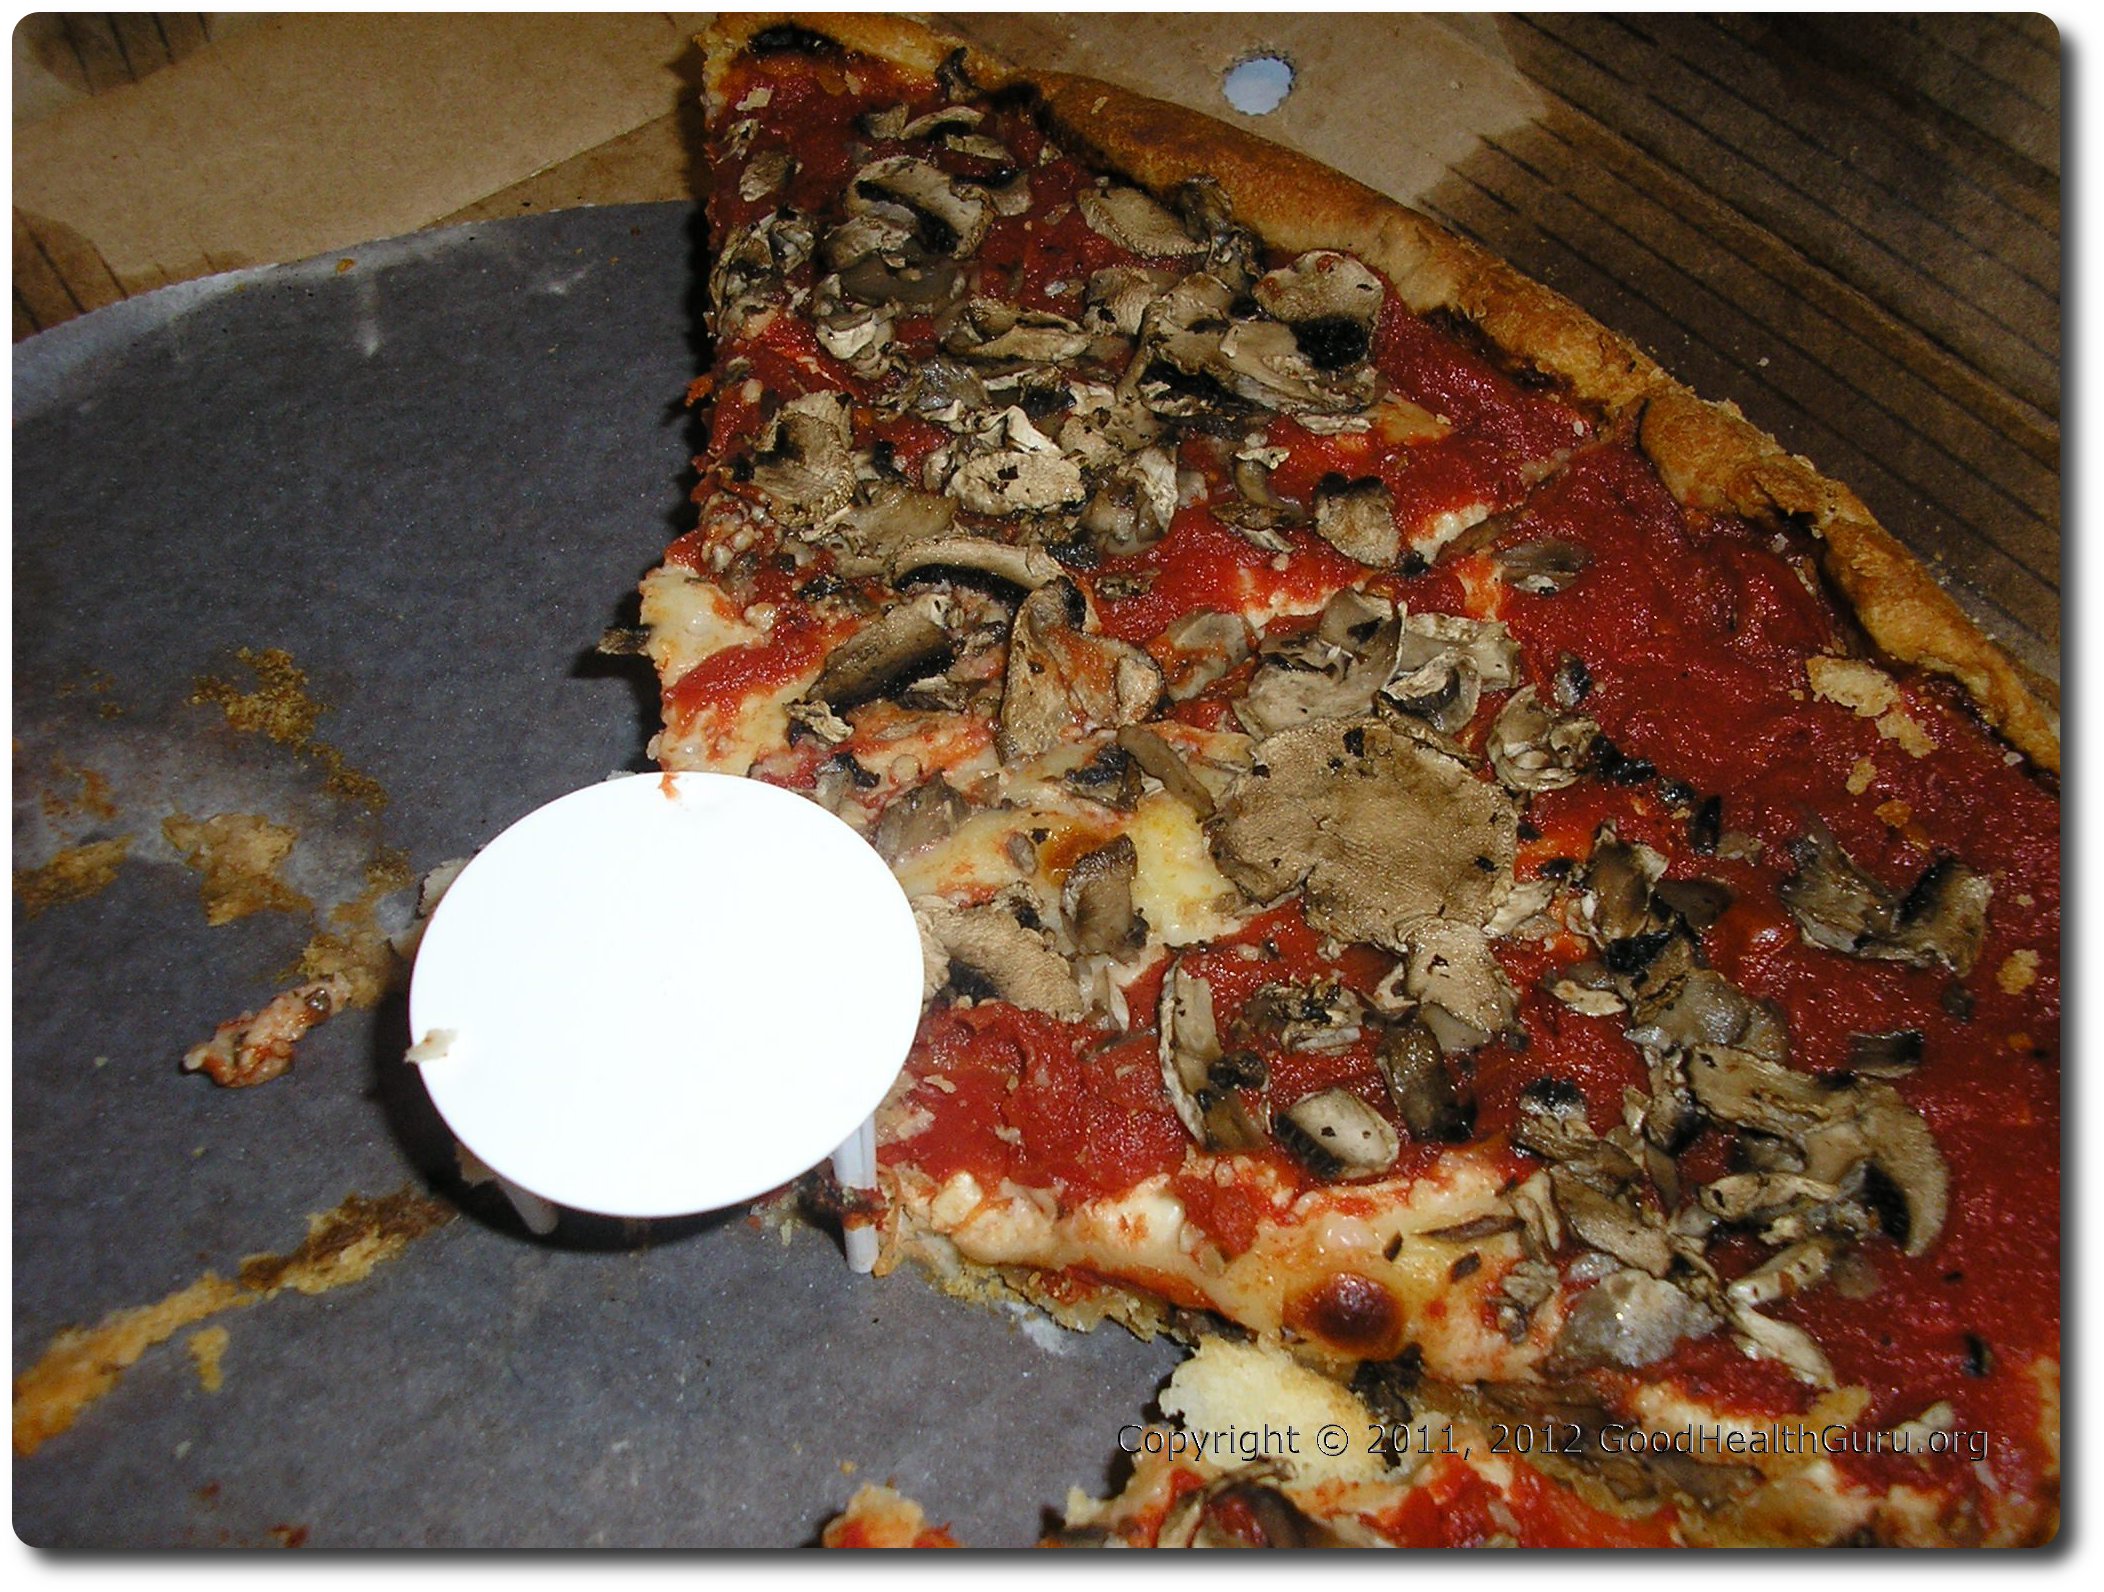 Image of Partially Eaten Pizza